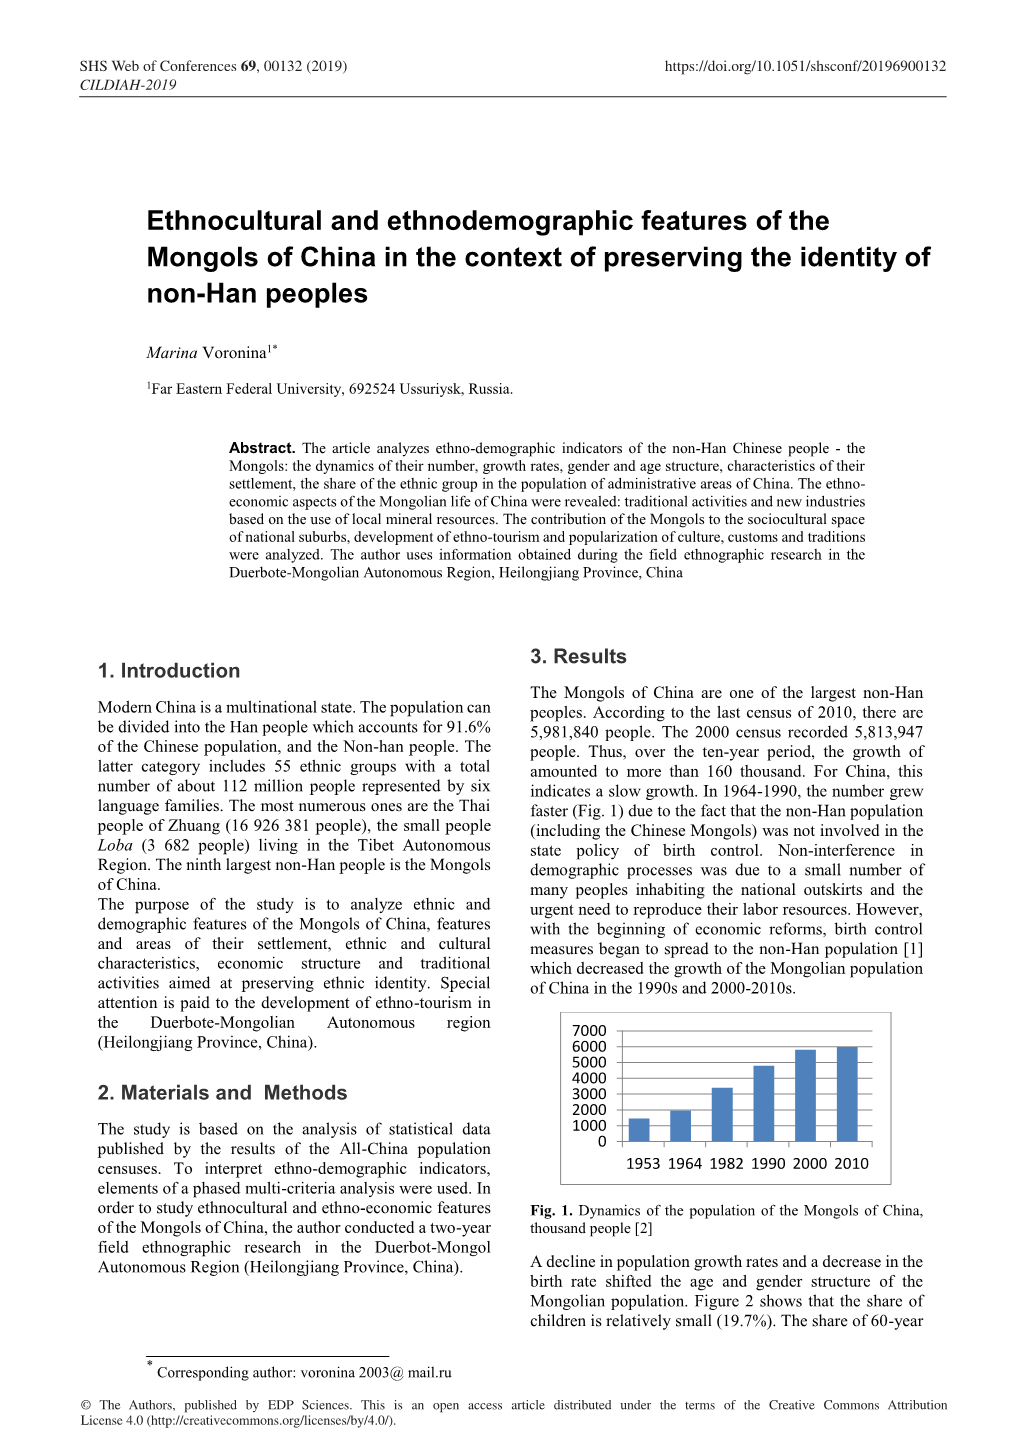 Ethnocultural and Ethnodemographic Features of the Mongols of China in the Context of Preserving the Identity of Non-Han Peoples